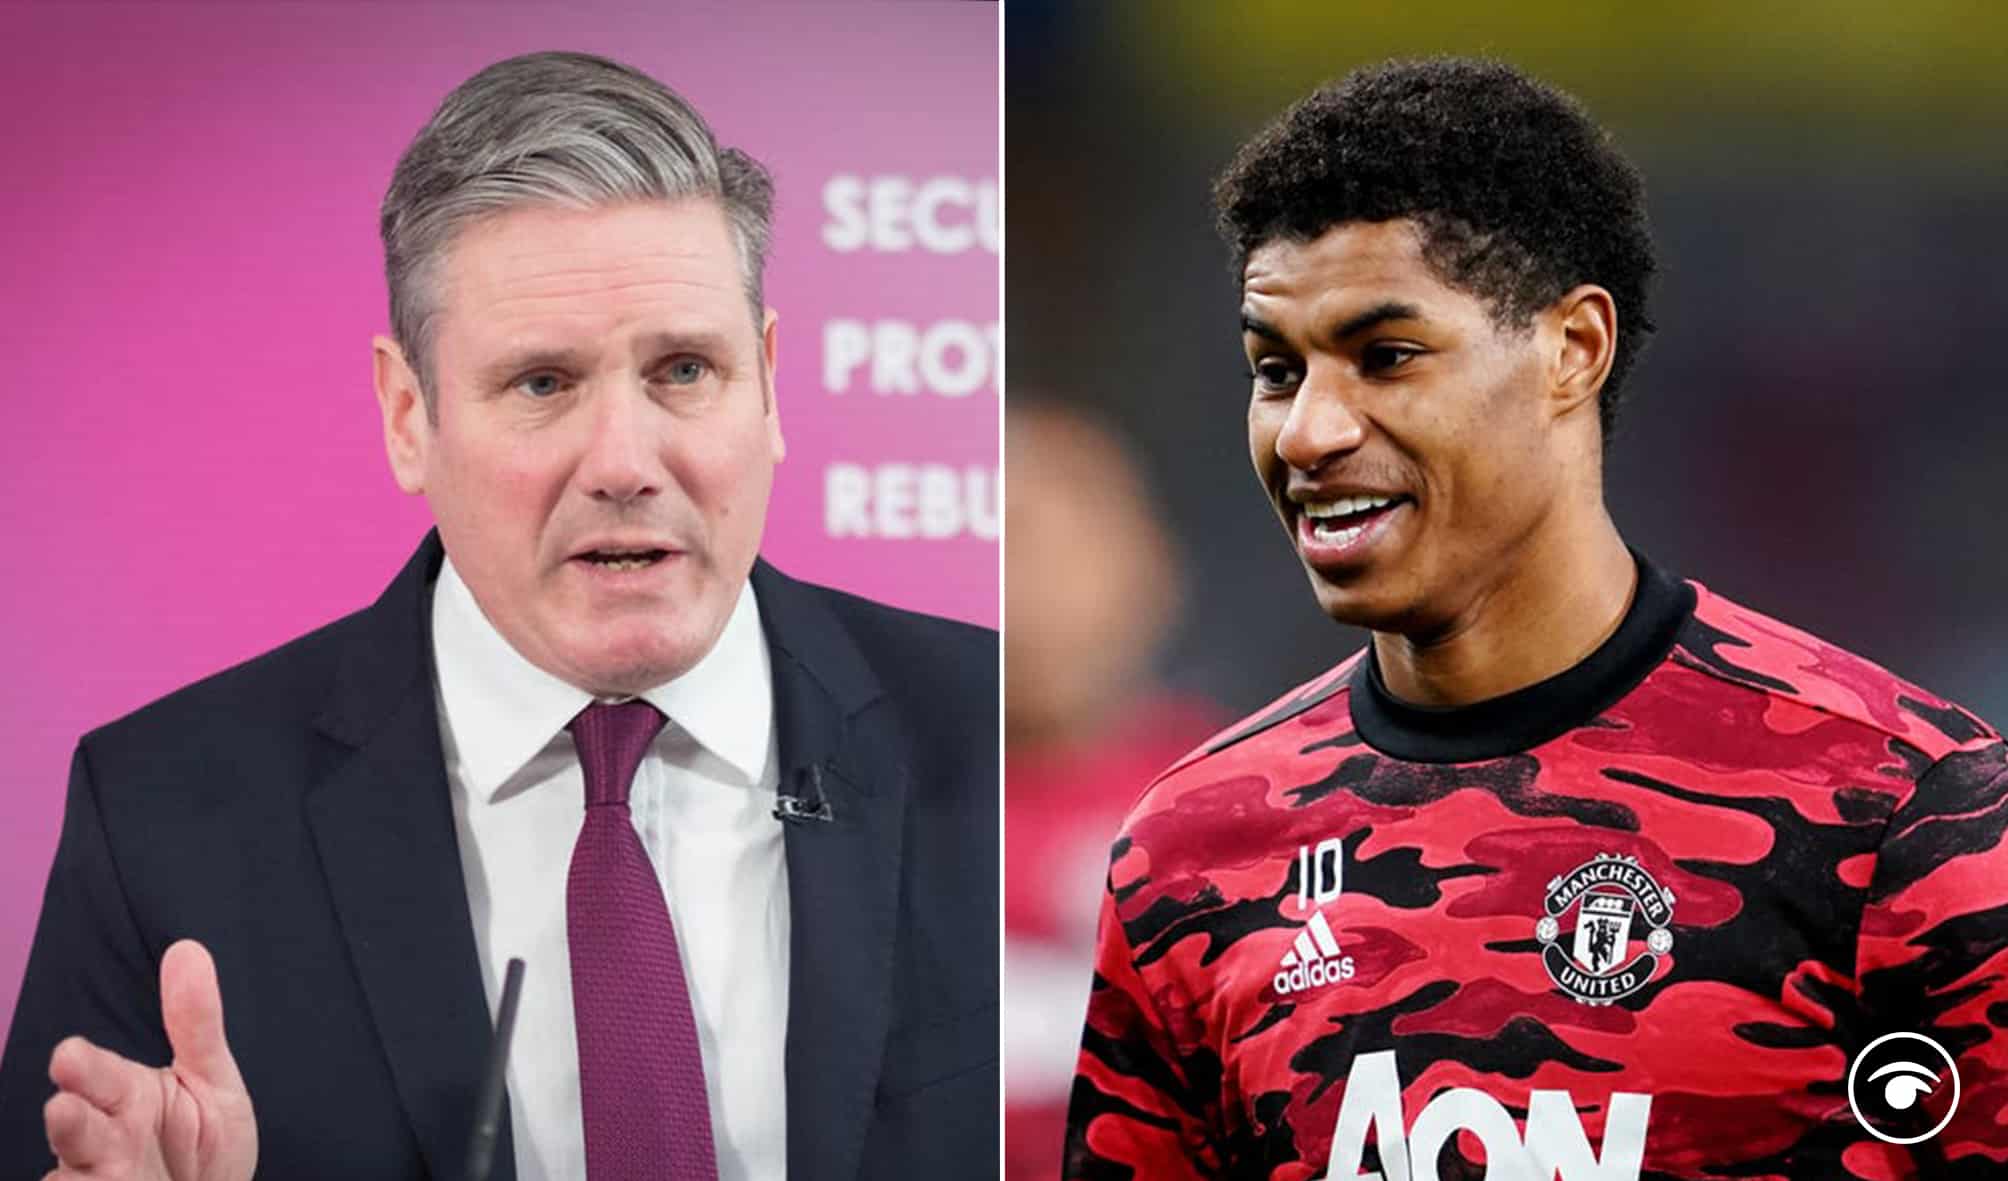 More people think Piers Morgan and Marcus Rashford are holding Govt to account than Starmer